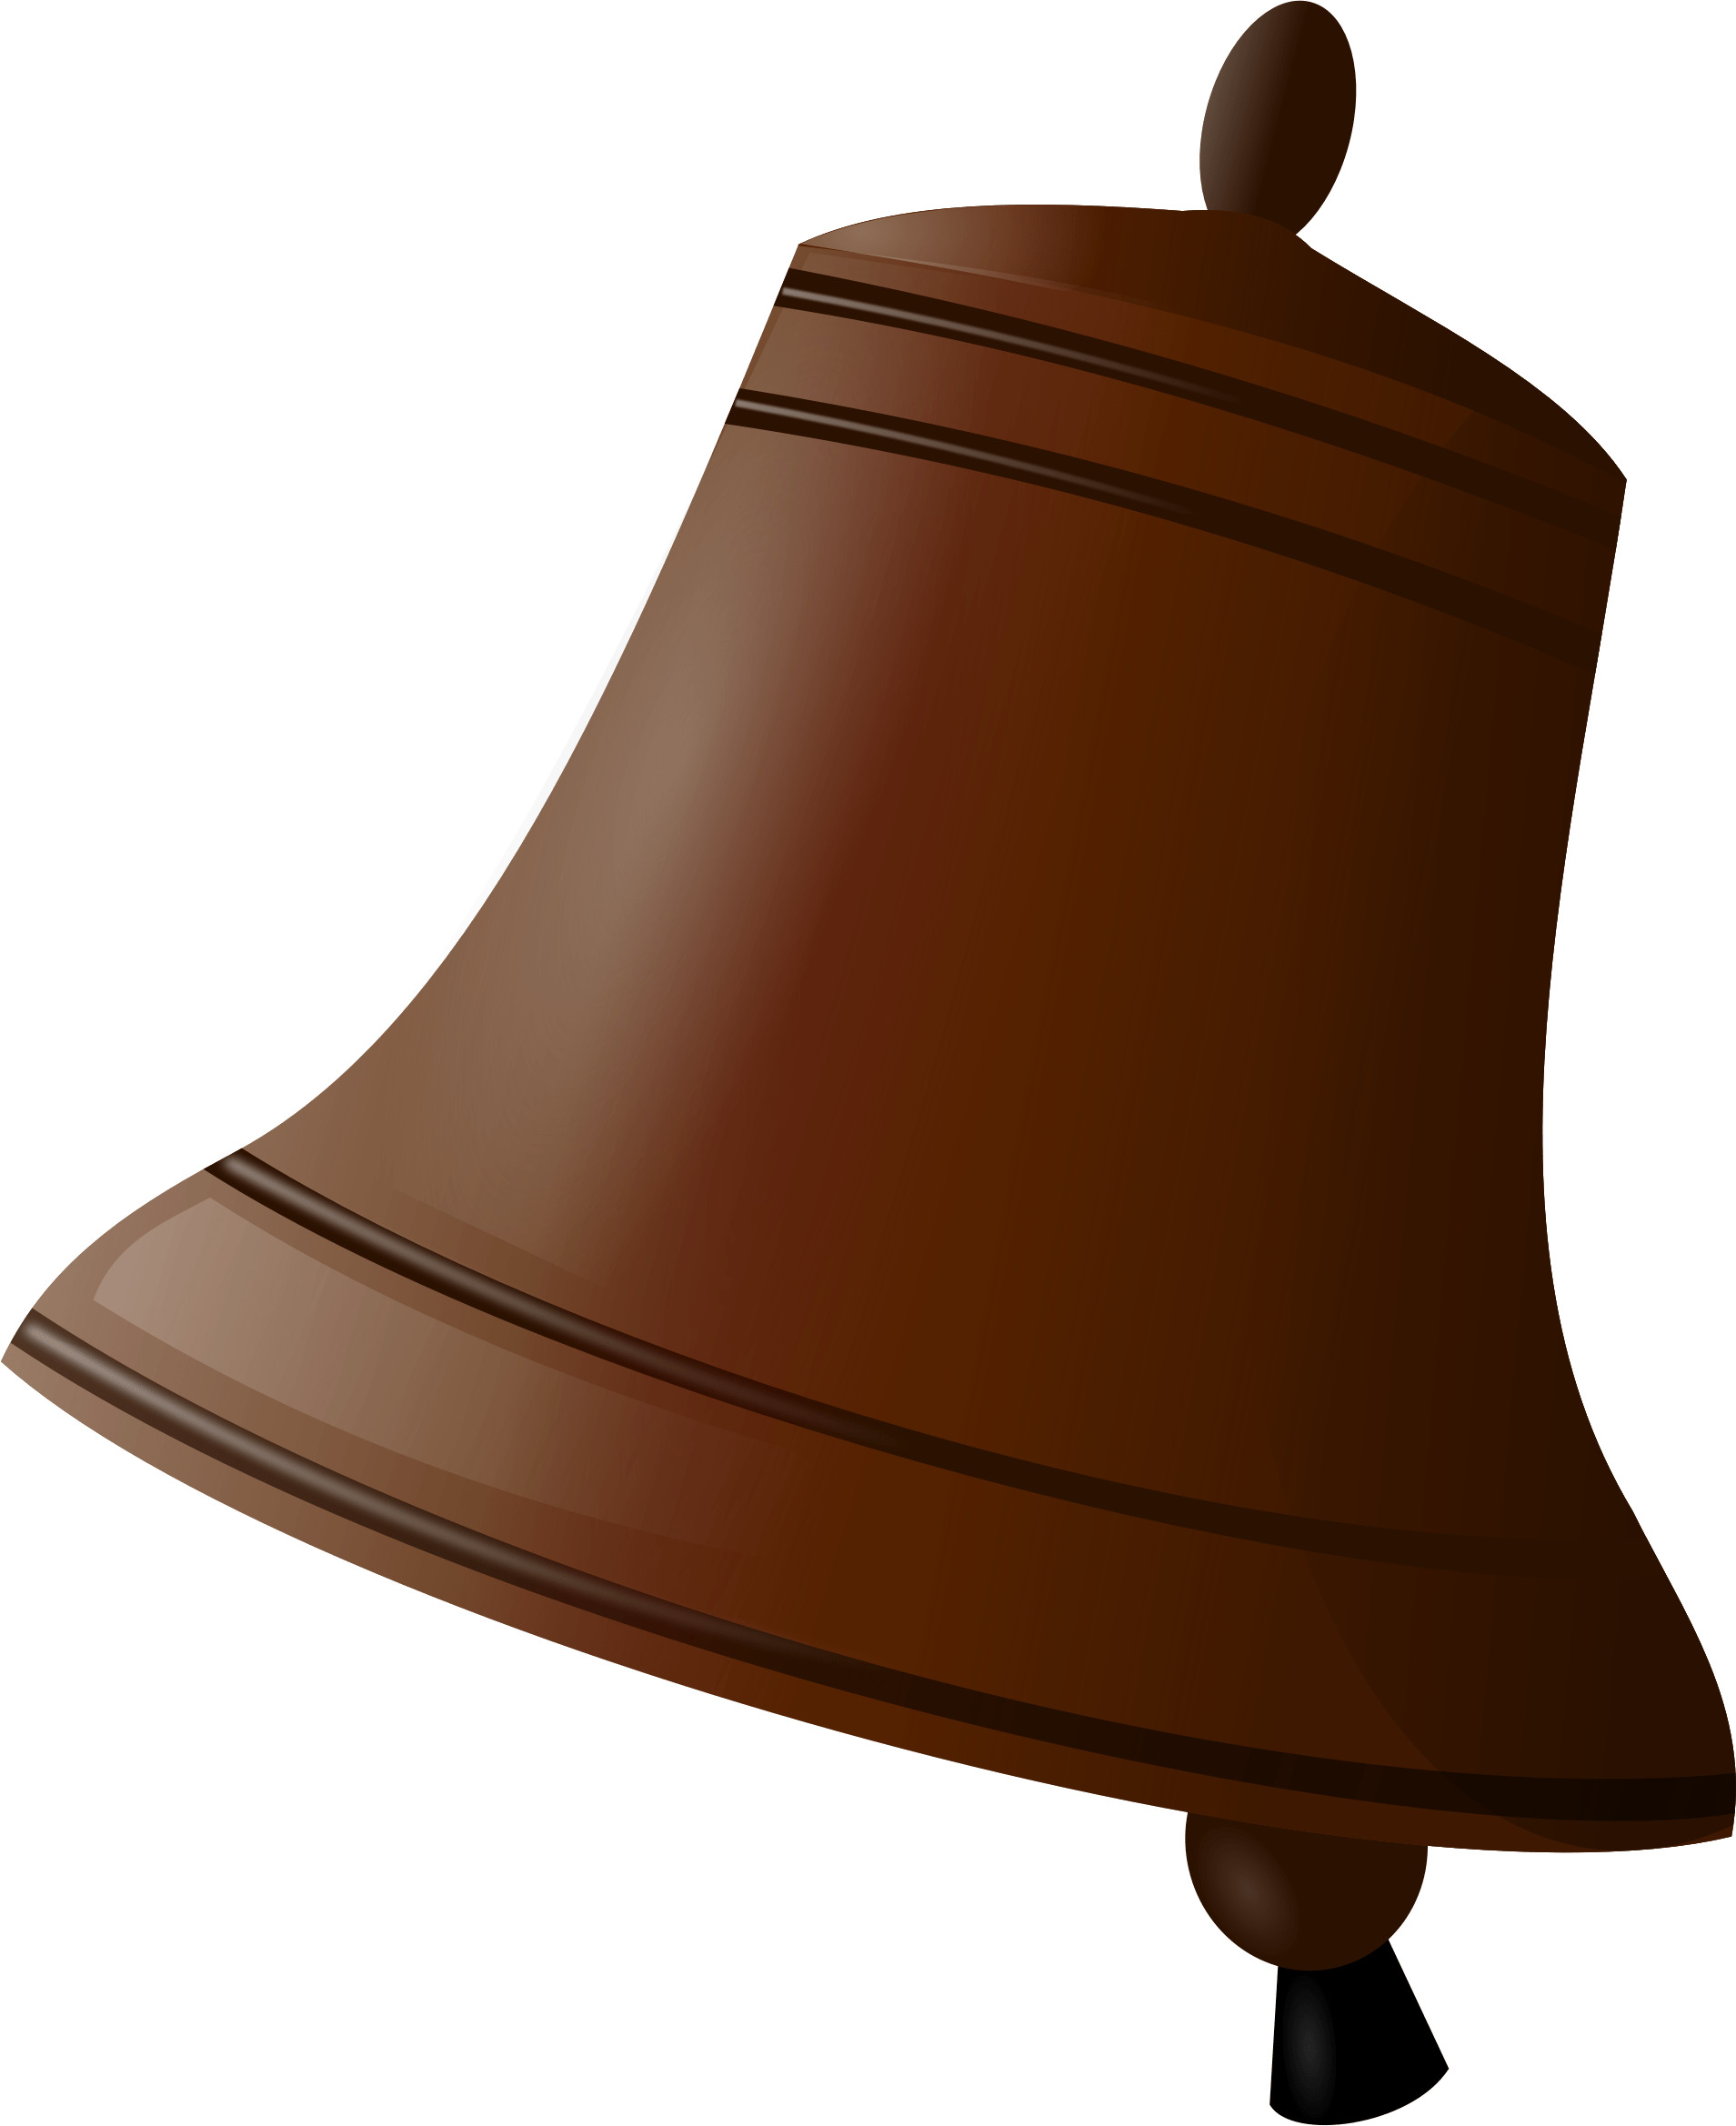 Big Bell png icons